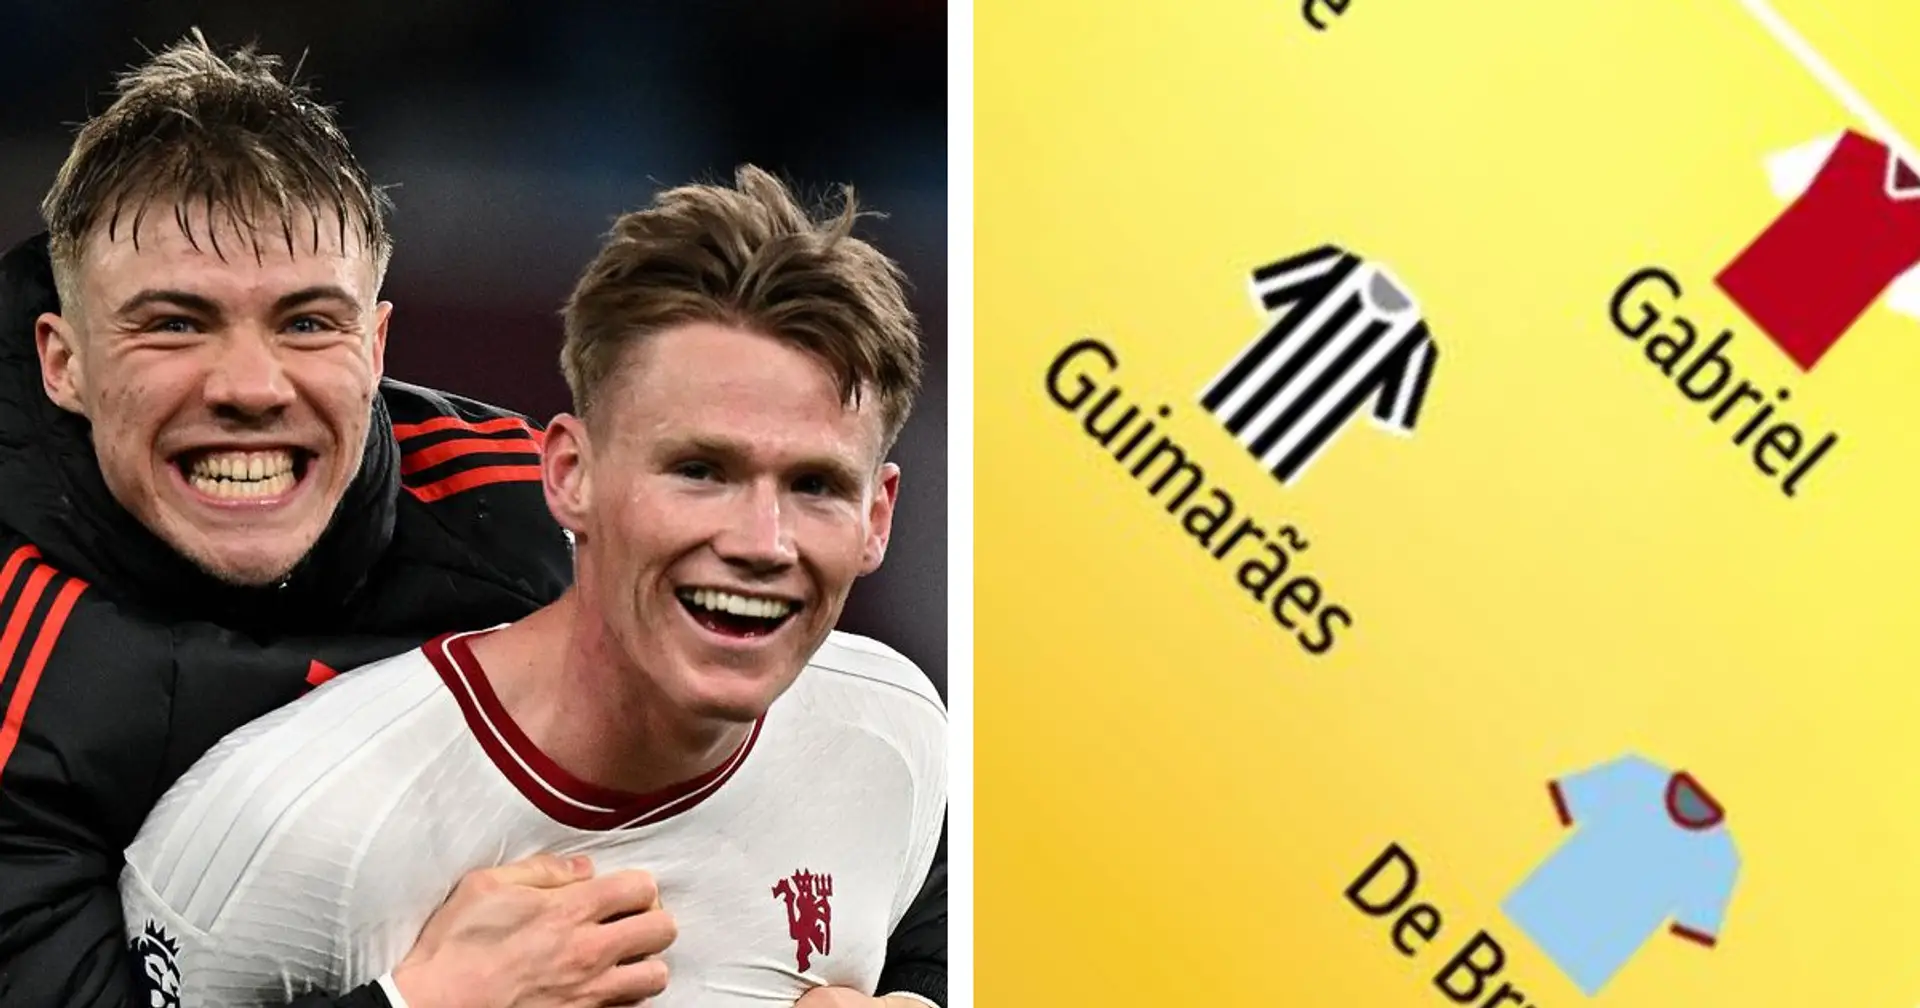 One Man United star makes BBC's Team of the Week after Villa win — not Hojlund or McTominay